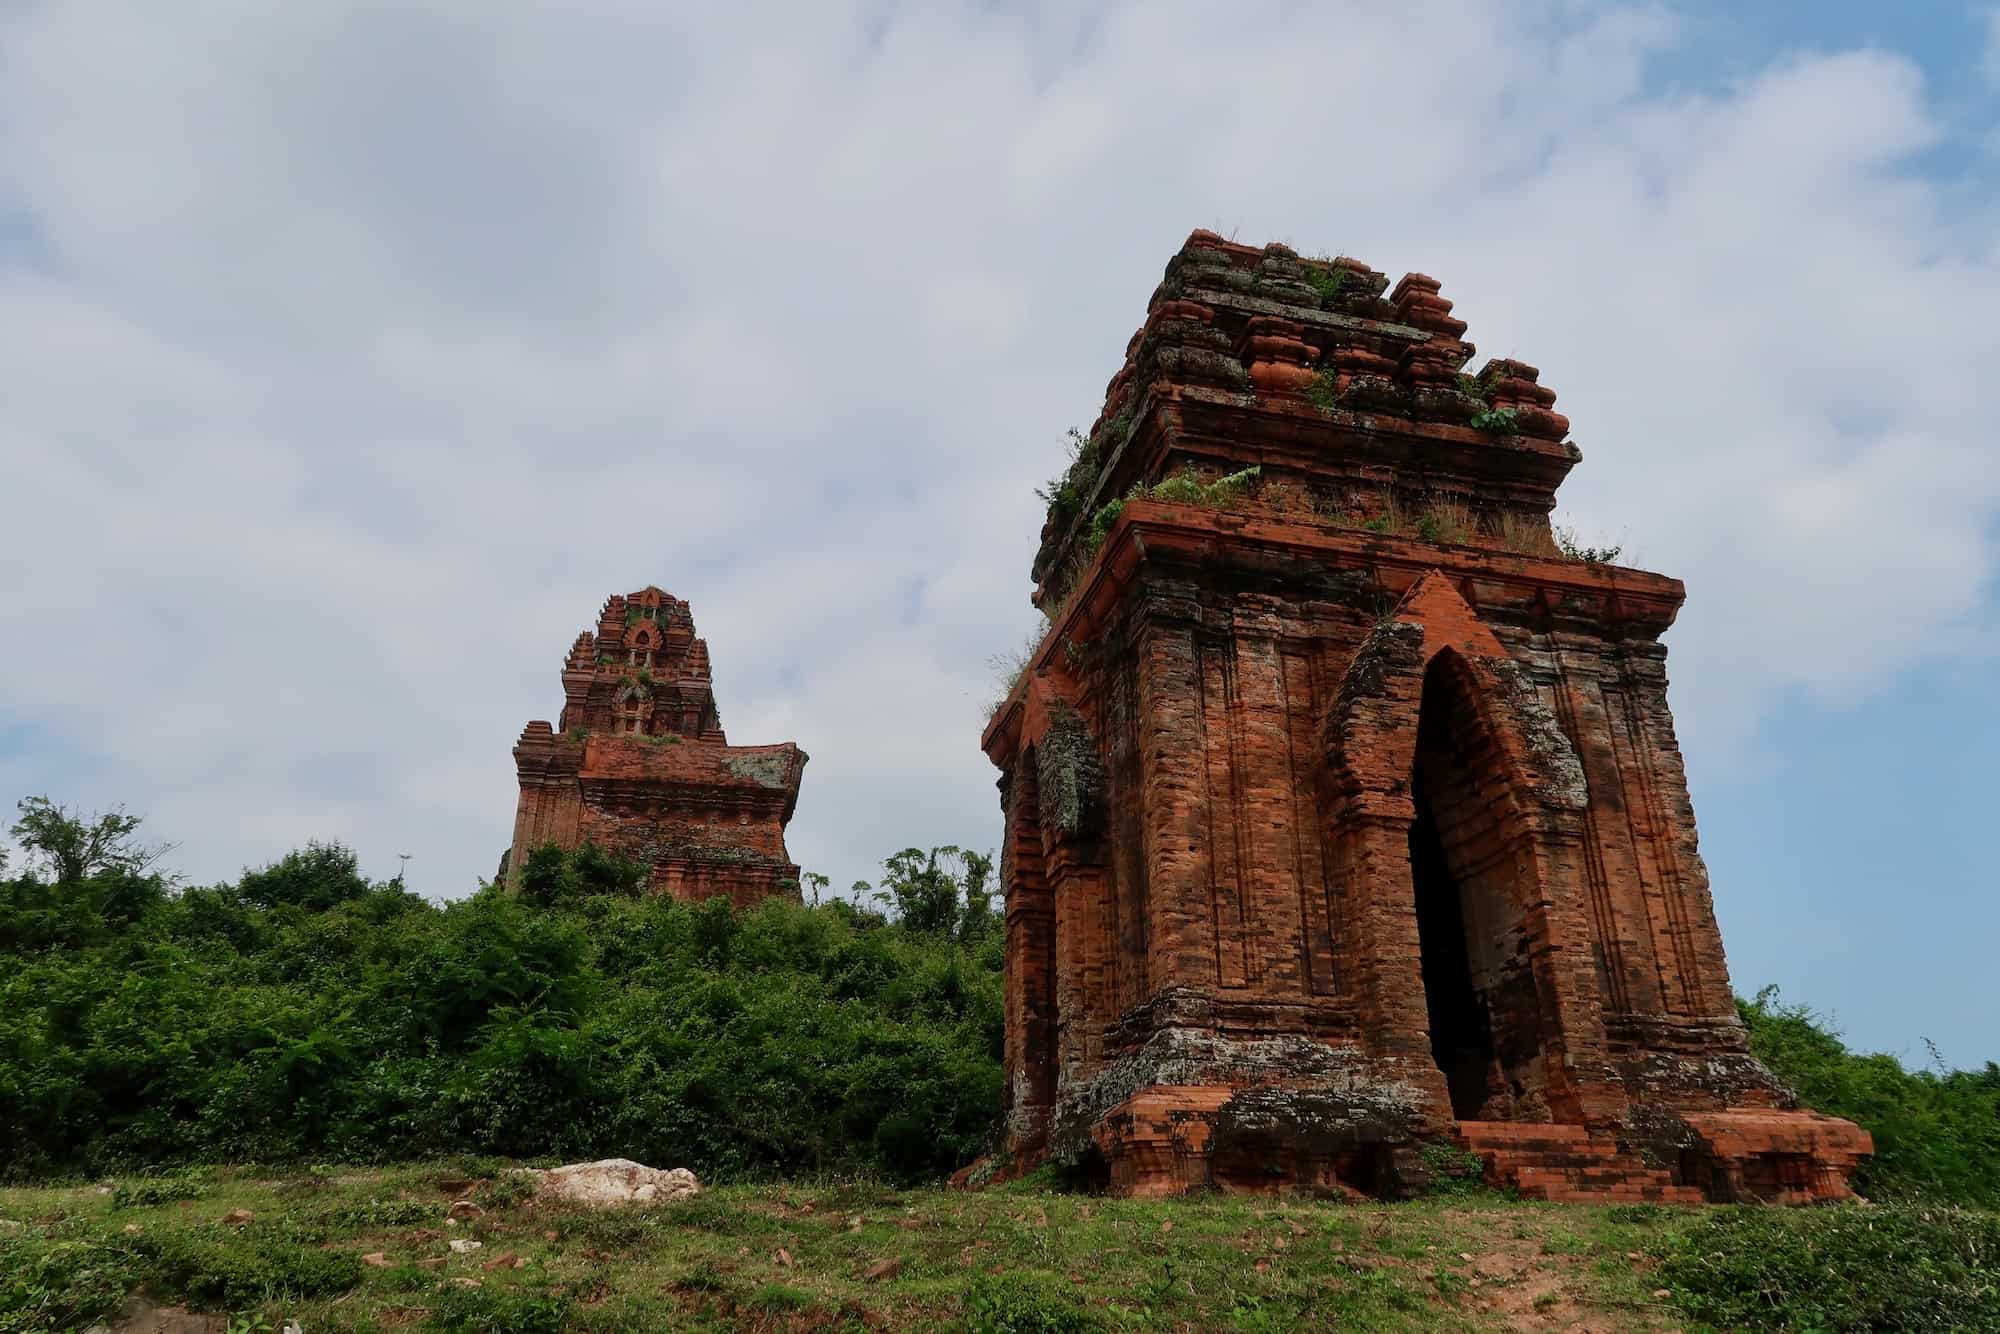 Architecture Profile: Cham Towers, the Hindu Temples of Ancient Vietnam